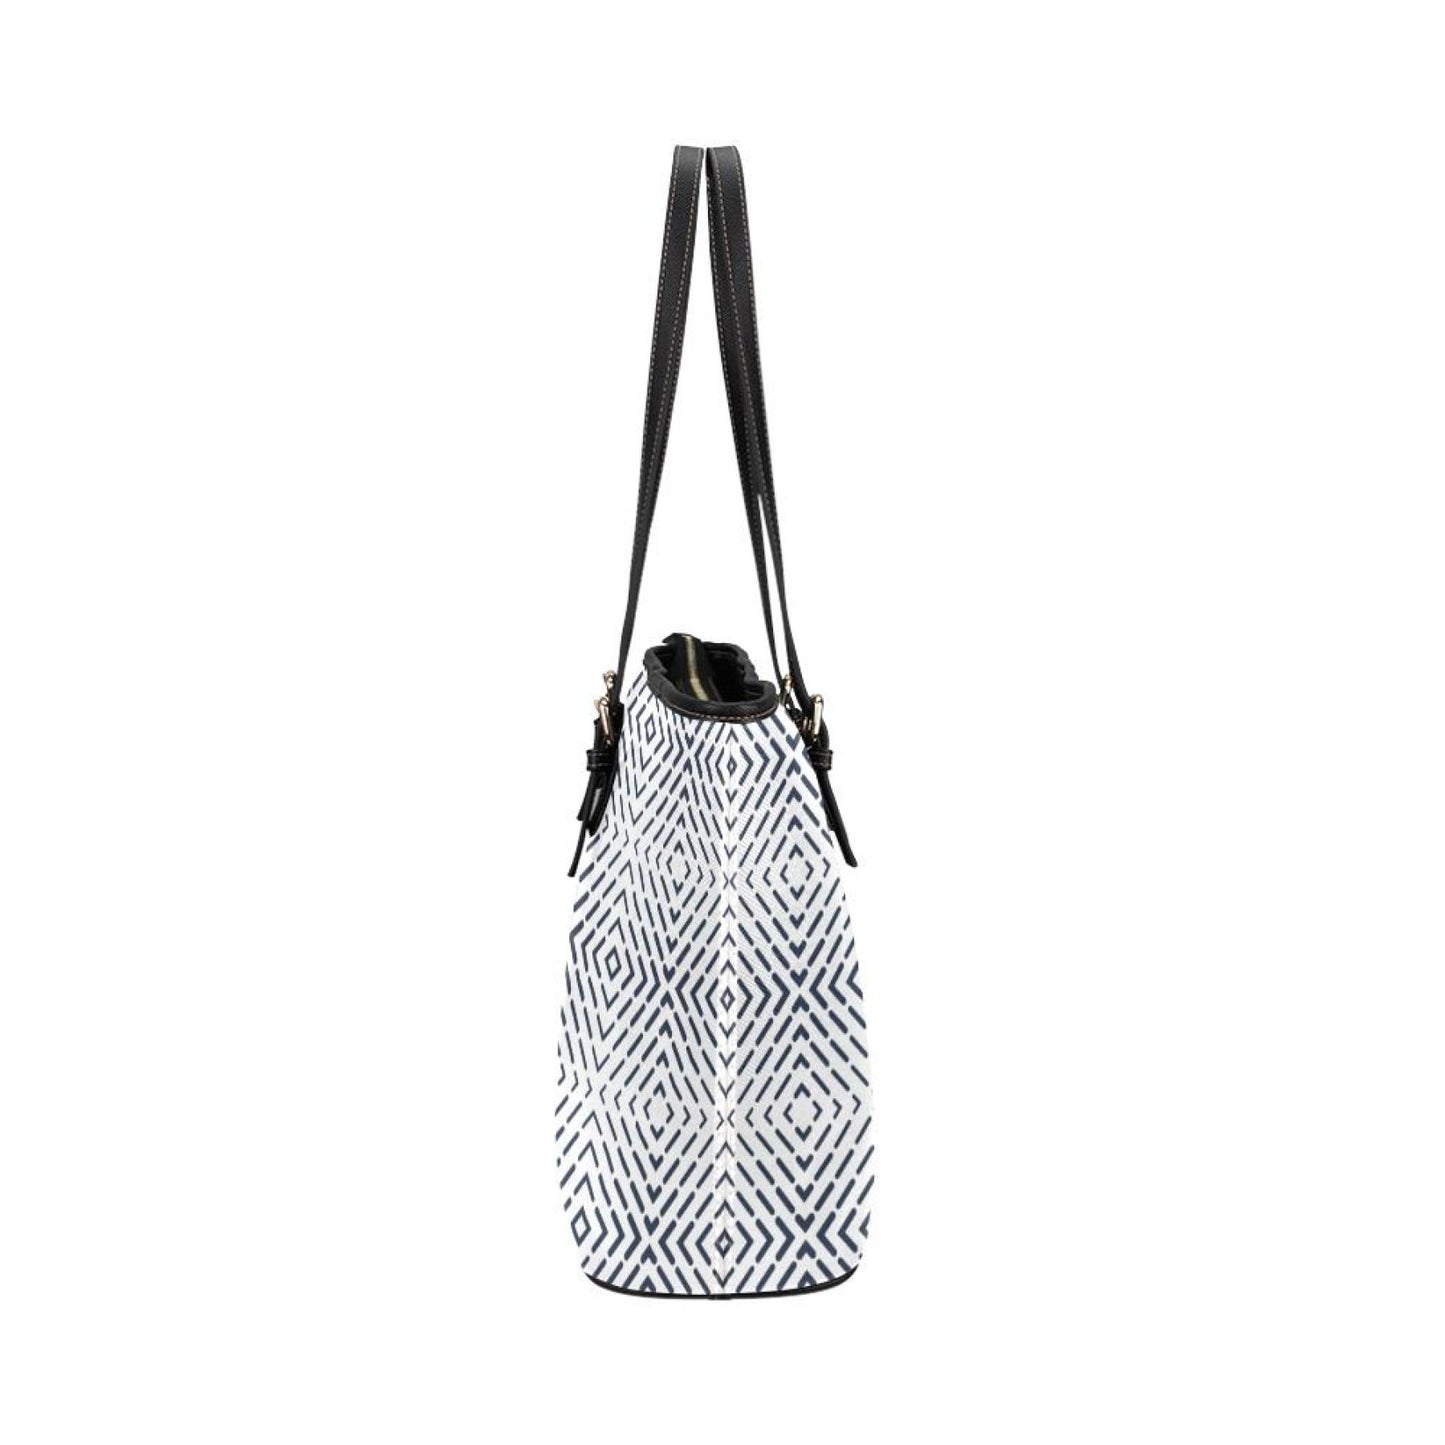 Large Leather Tote Shoulder Bag -  Black And White Gradient Pattern